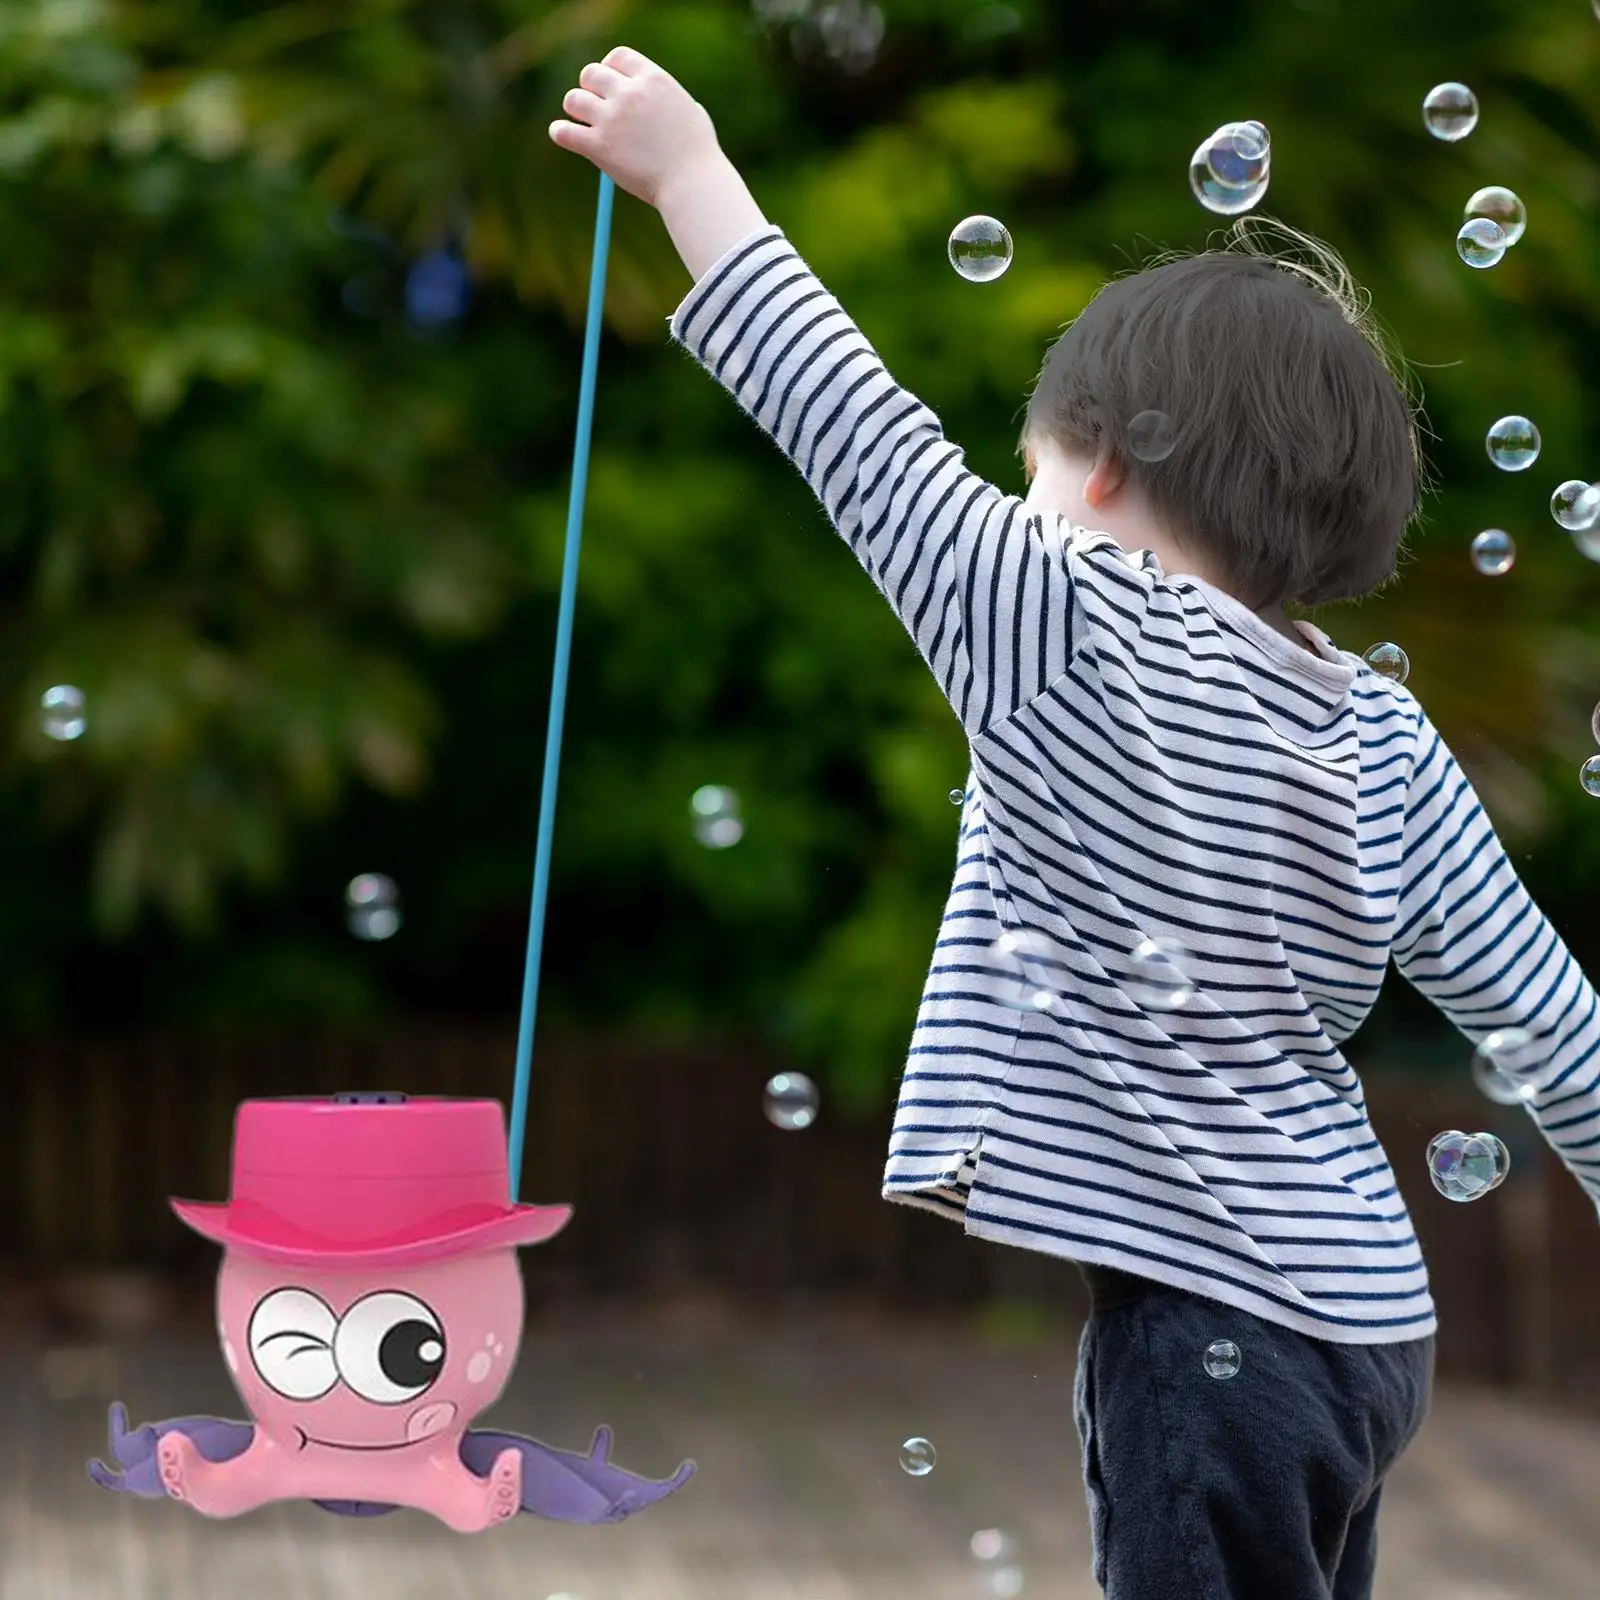 Bubble Making Machine Pull Cable Walking Birthday Gifts for Lawn Game, Boys Girls Toddlers